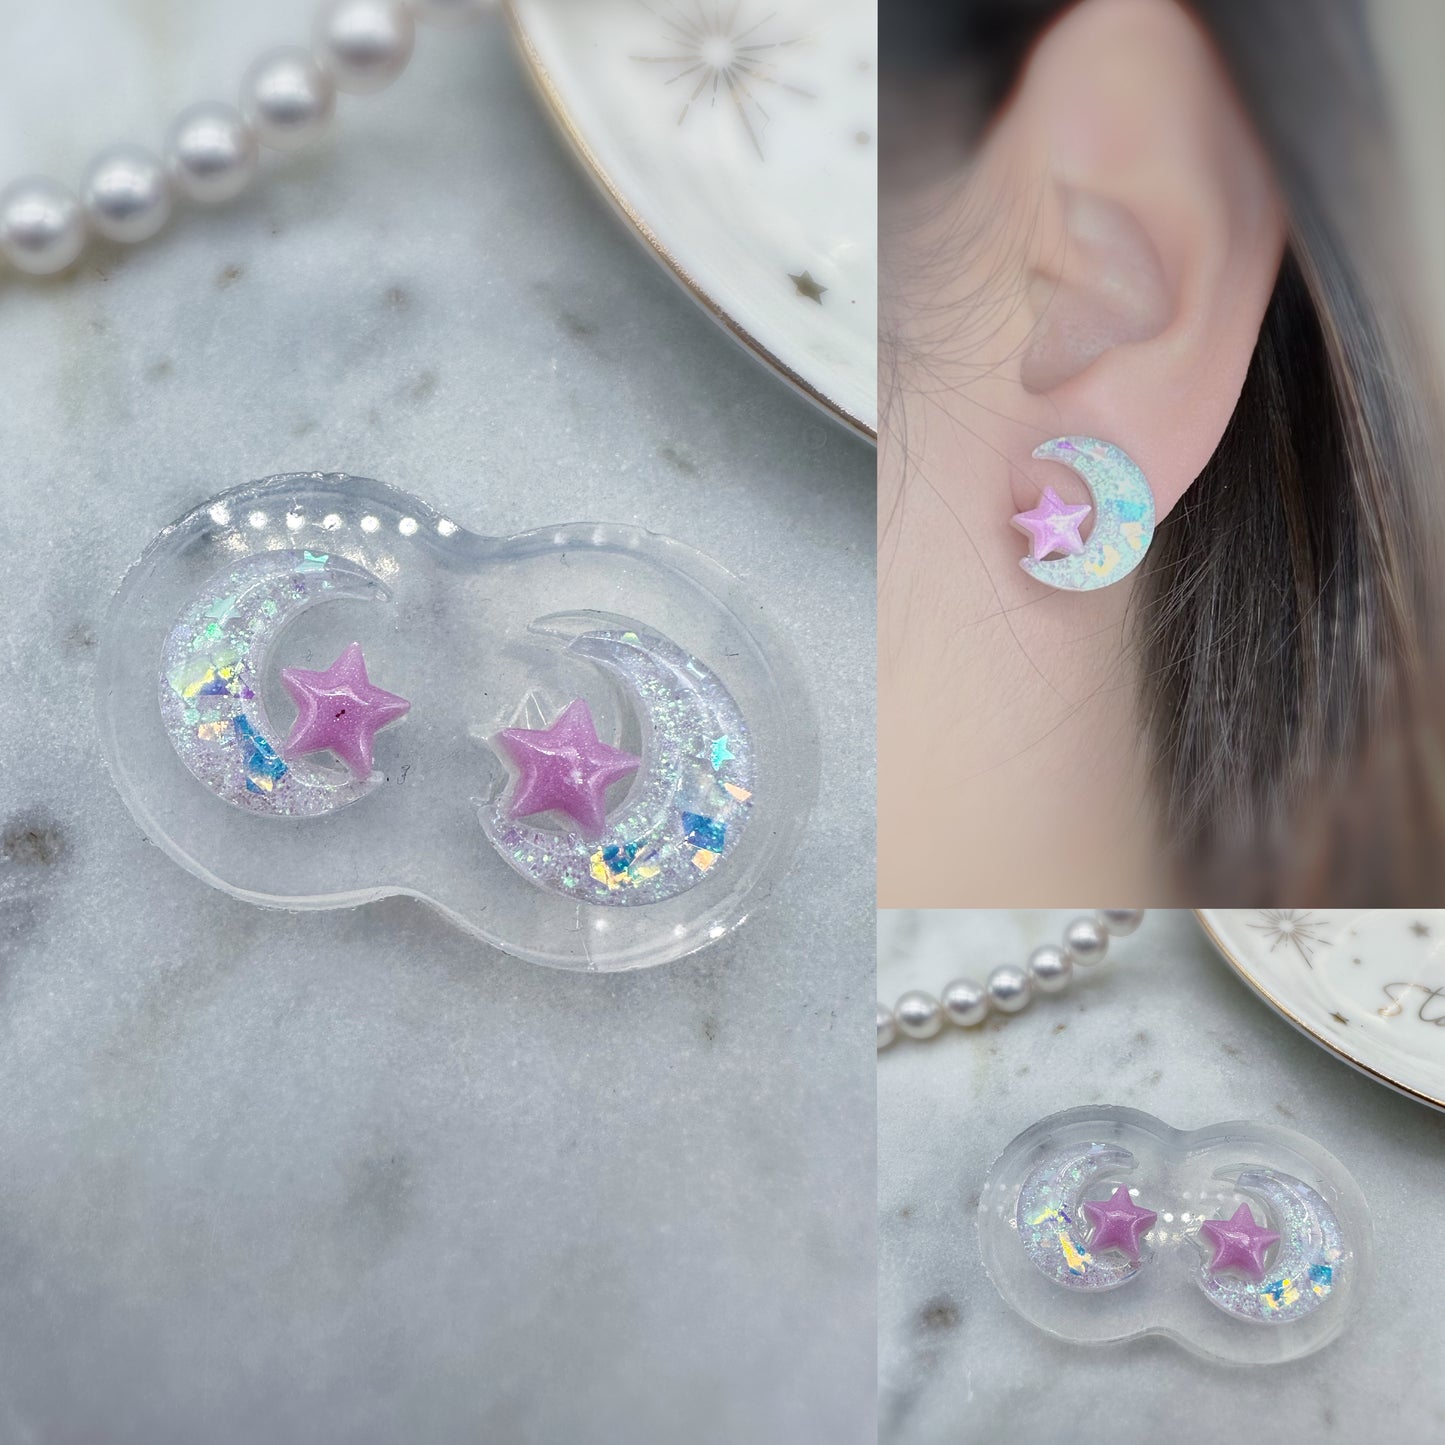 Predomed and Layered Star and Moon Stud Earring Mold